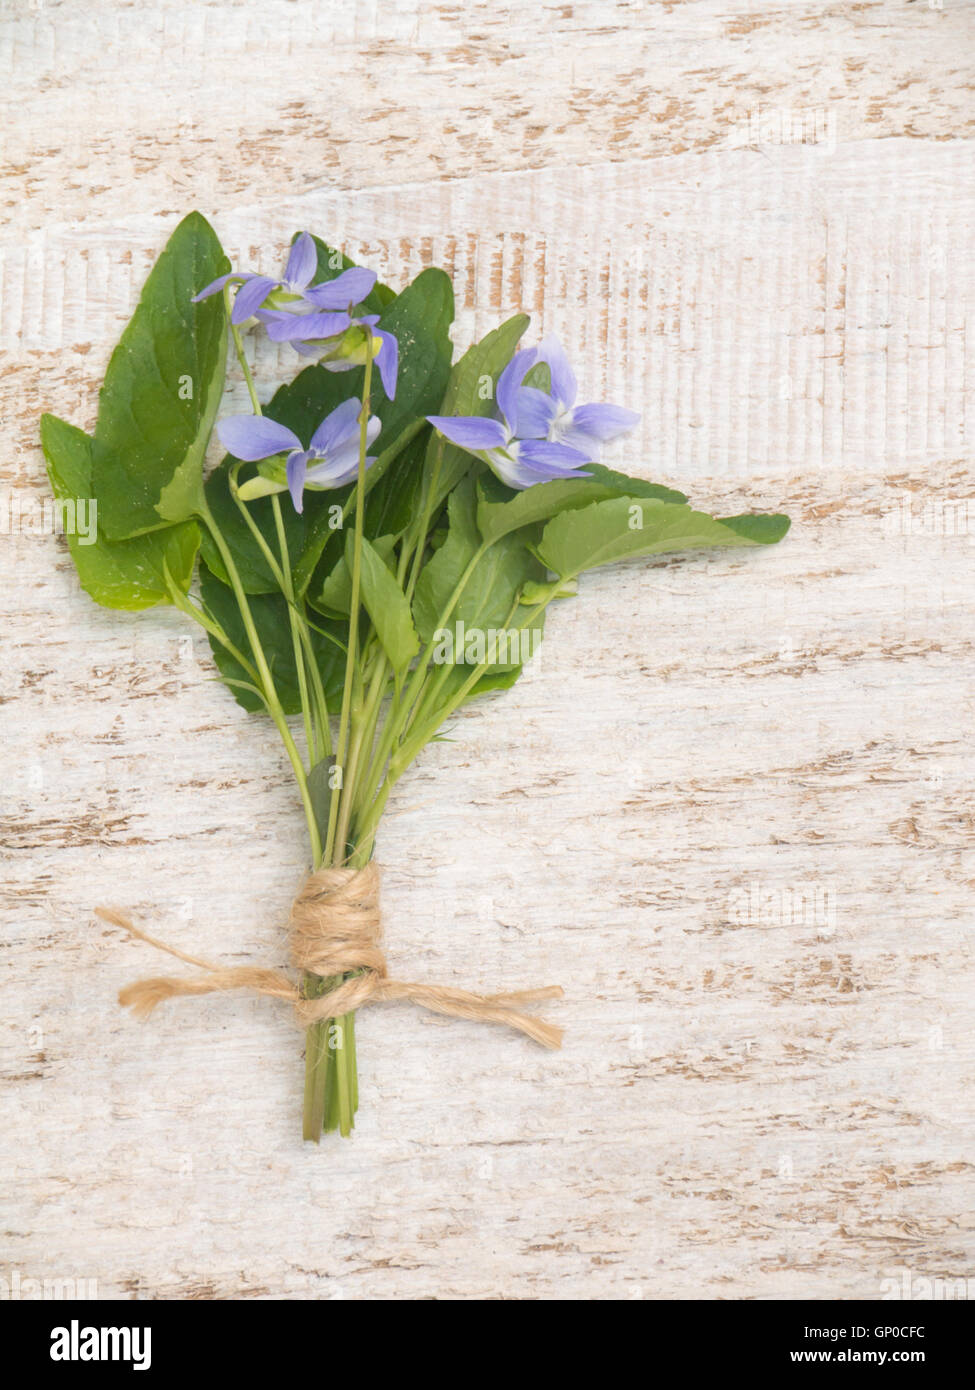 Blue viola flowers bouquet tied with jute rope on the rustic white painted background Stock Photo